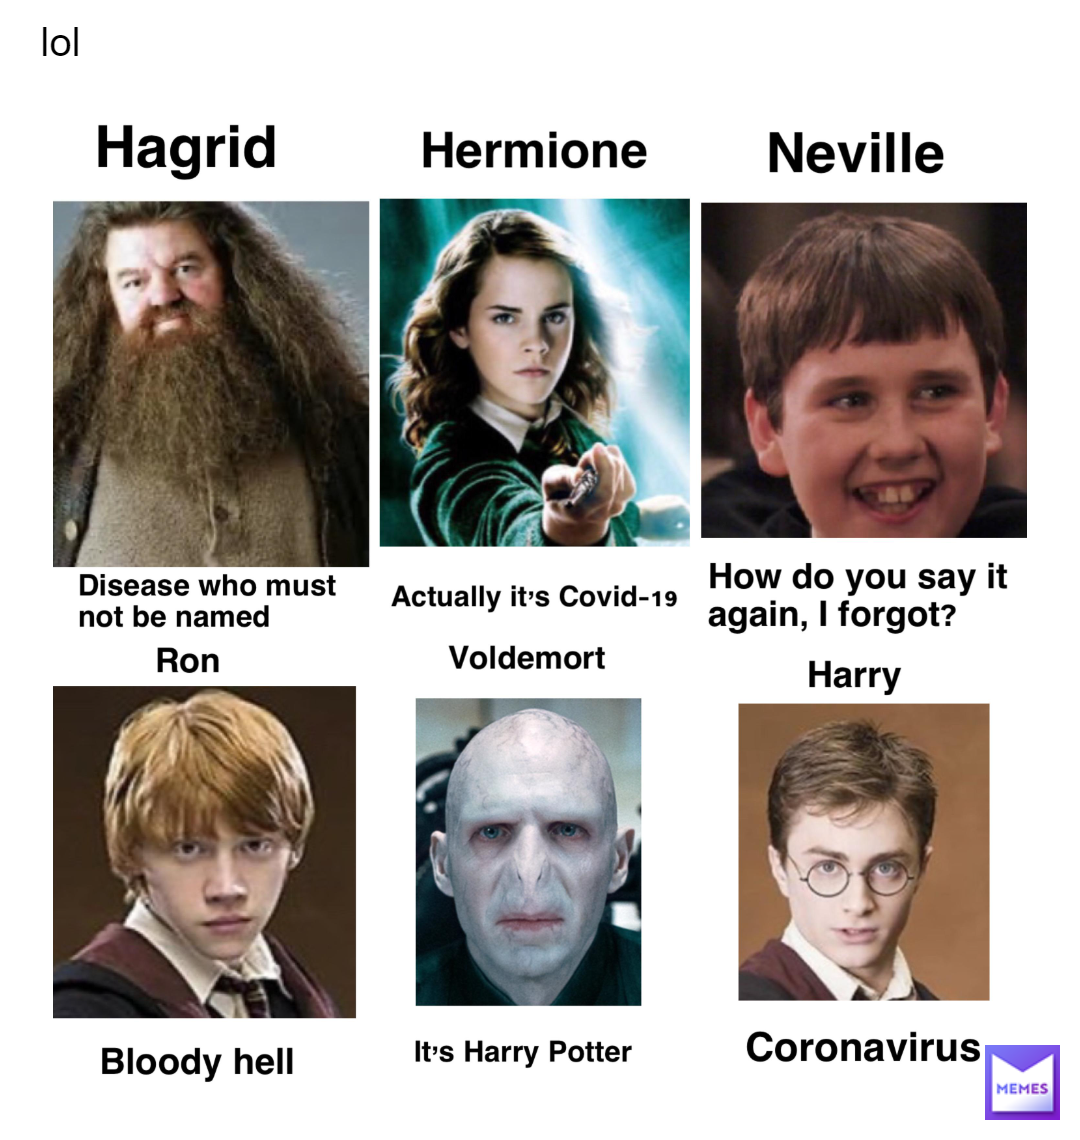 I should not be laughing at this #harrypotter #harrypottermemes